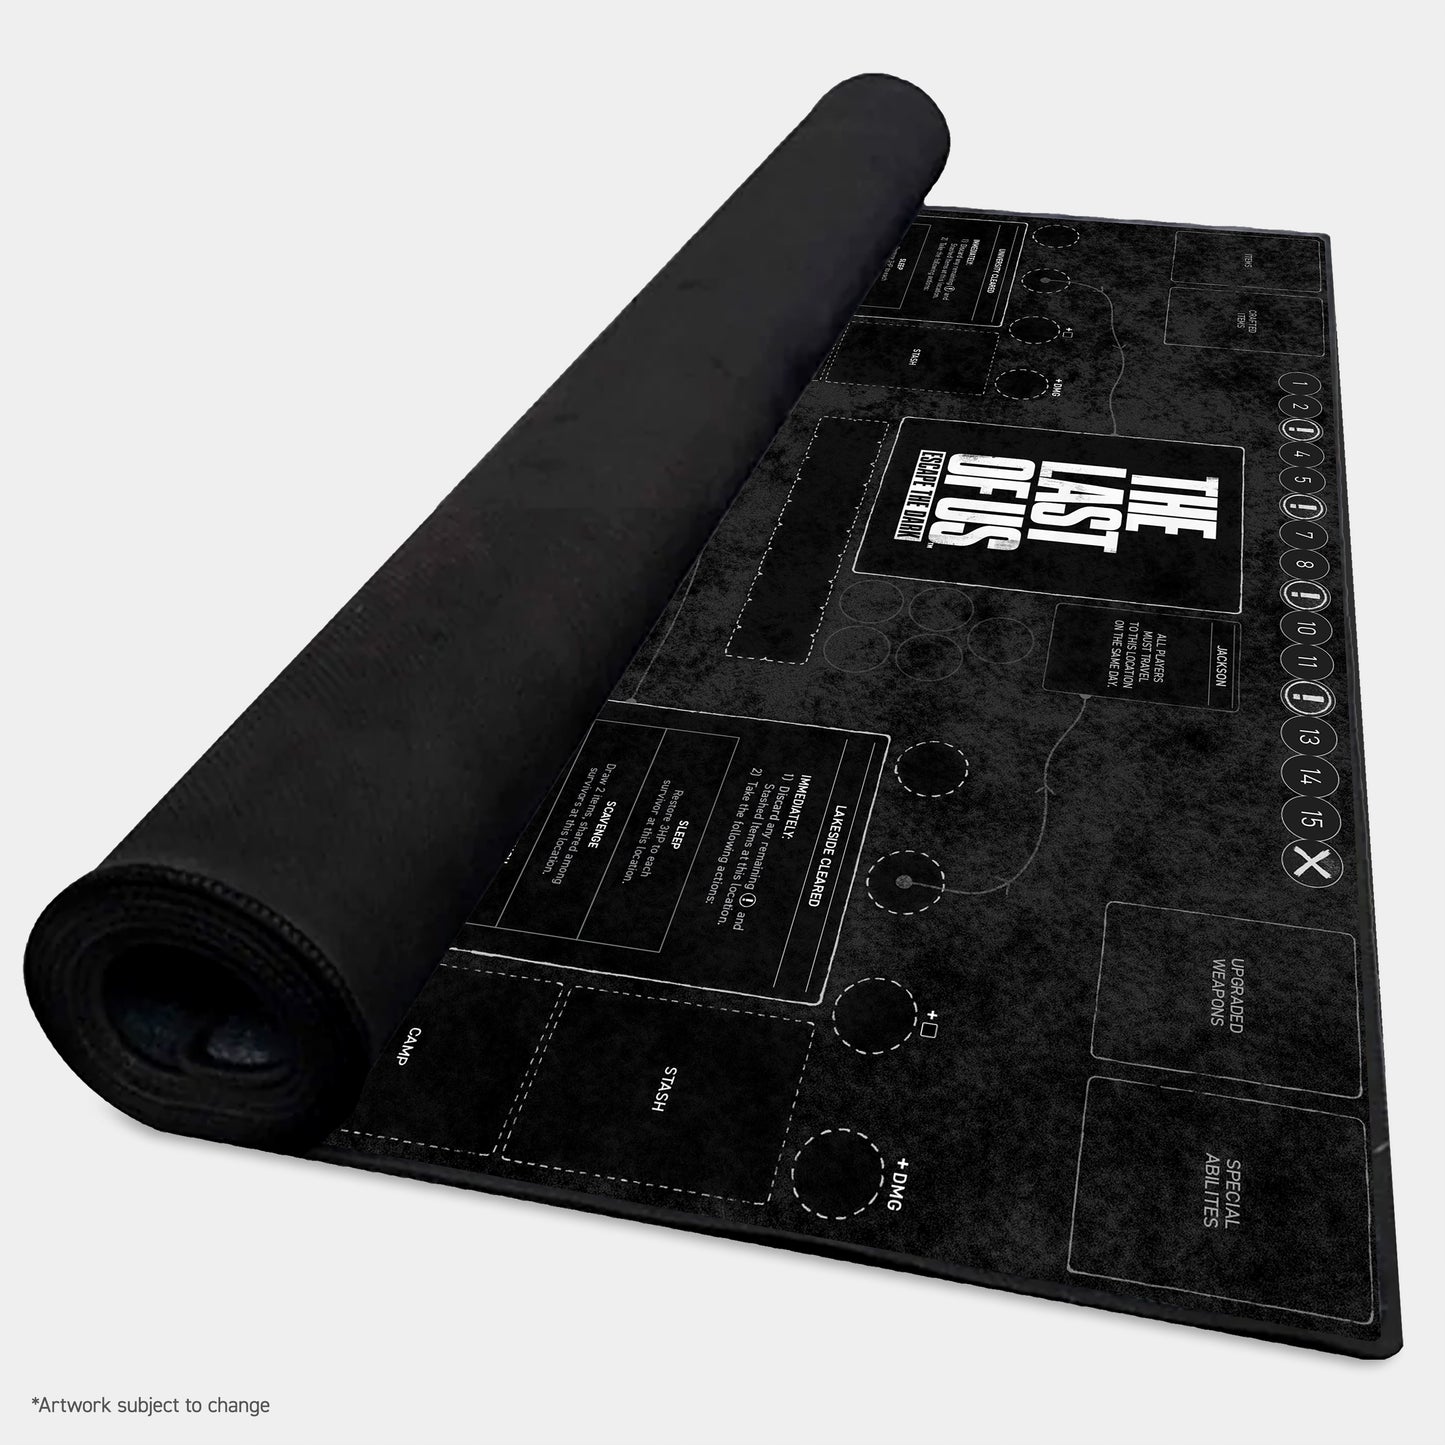 PRE-ORDER - The Last of Us: Escape the Dark Playmat